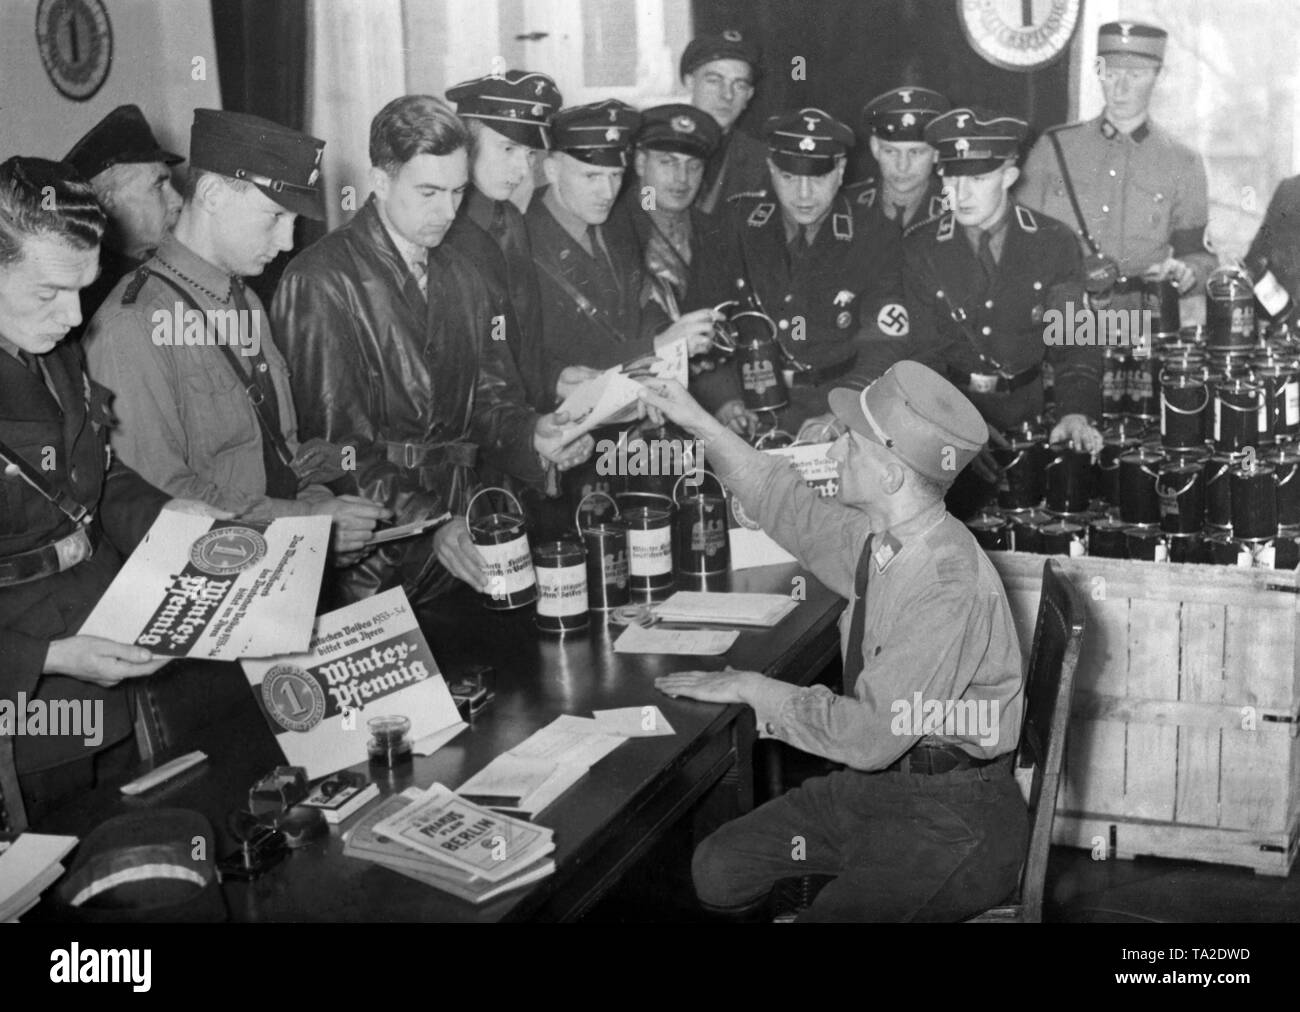 Members of SA and SS receive collecting boxes, with which they should carry out a 'Winterpfennig' collection for the Nazi Winter Relief. Stock Photo